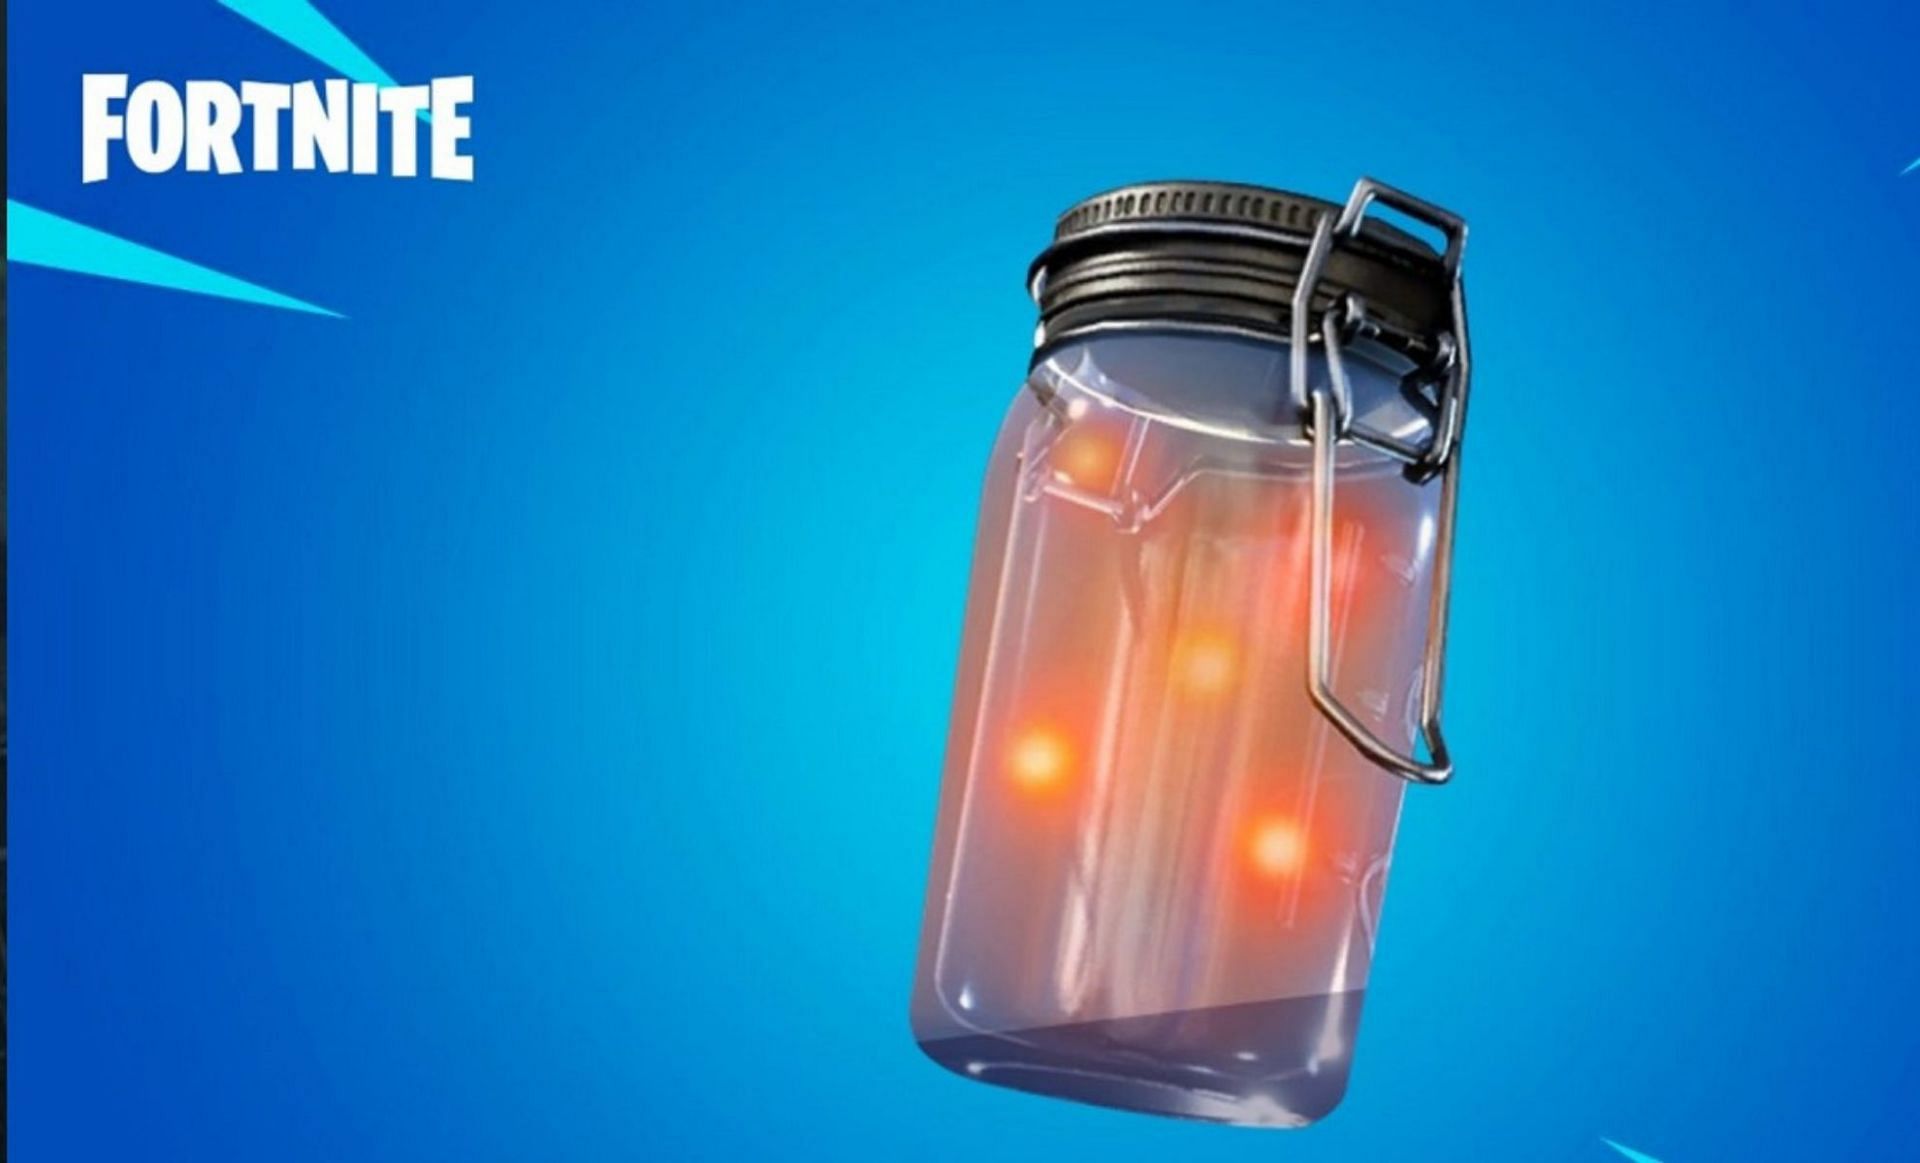 Fireflies are good for this challenge (Image via Epic Games)